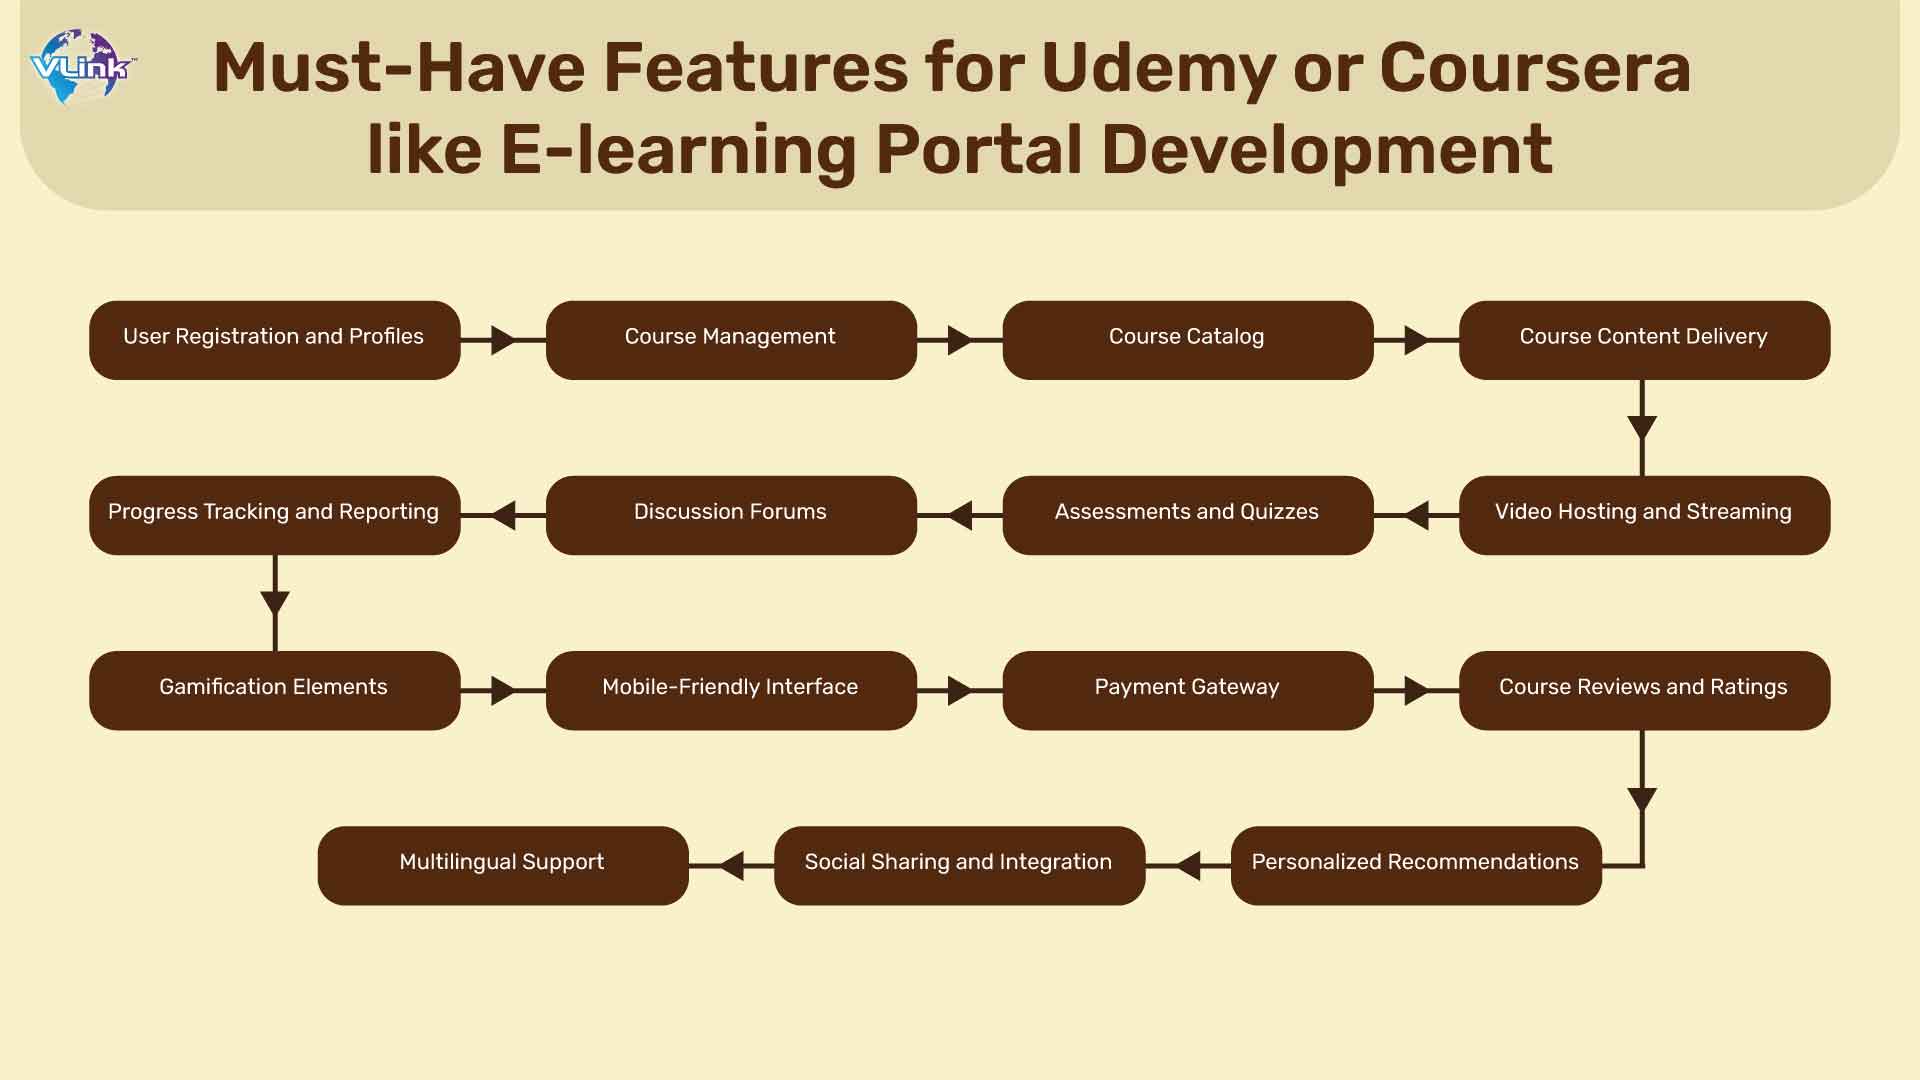 Must-Have Features for Udemy or Coursera like E-learning Portal Development